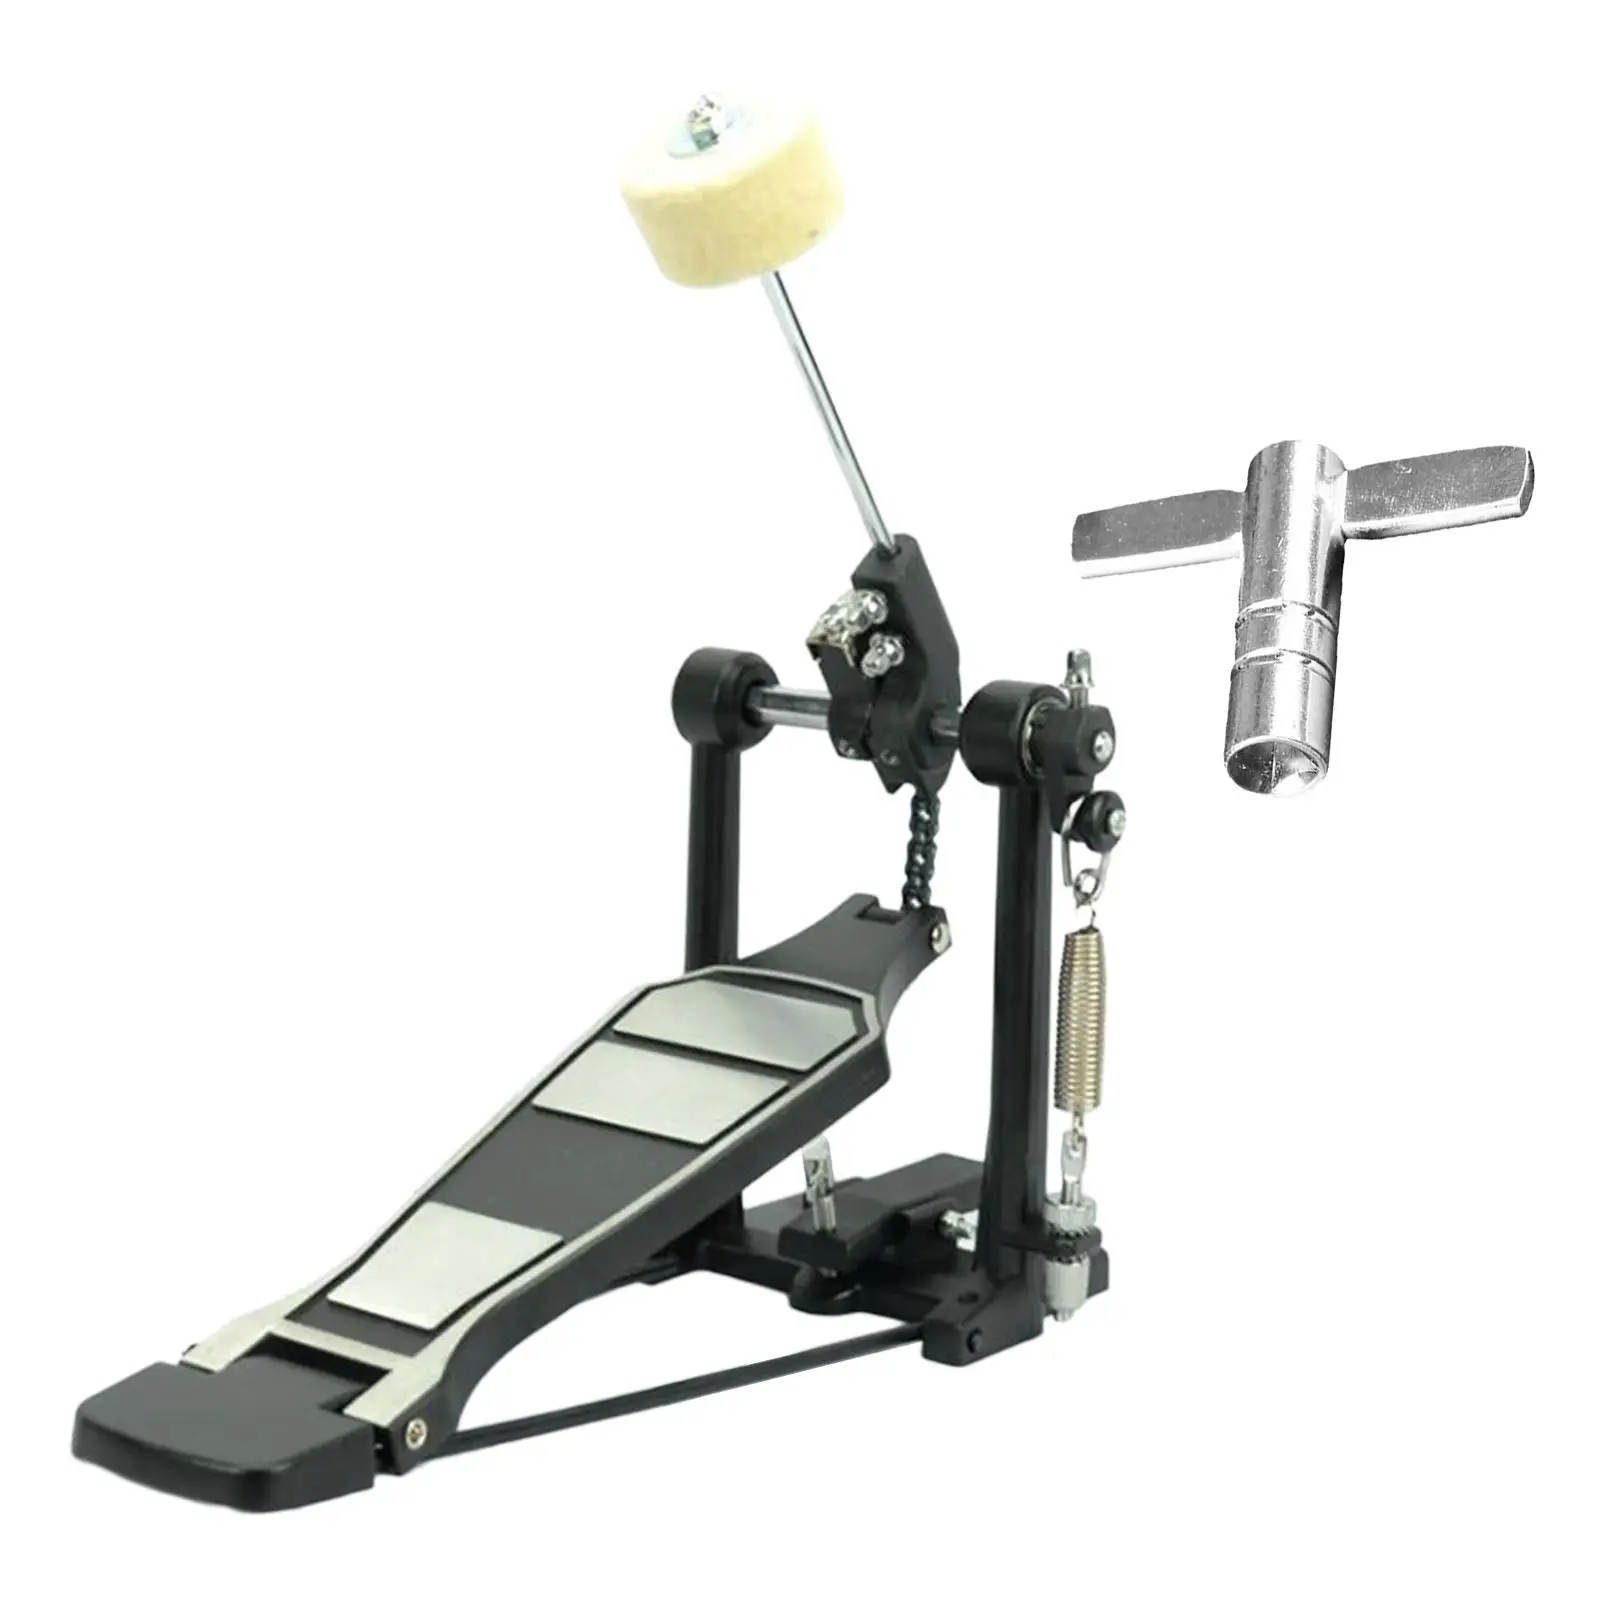 

Alloy Single Bass Drum Pedal Felt Beater Stick & Drum Key Sturdy Drive Kick Bass Pedal for Electronic Drums Drummers Jazz Drums